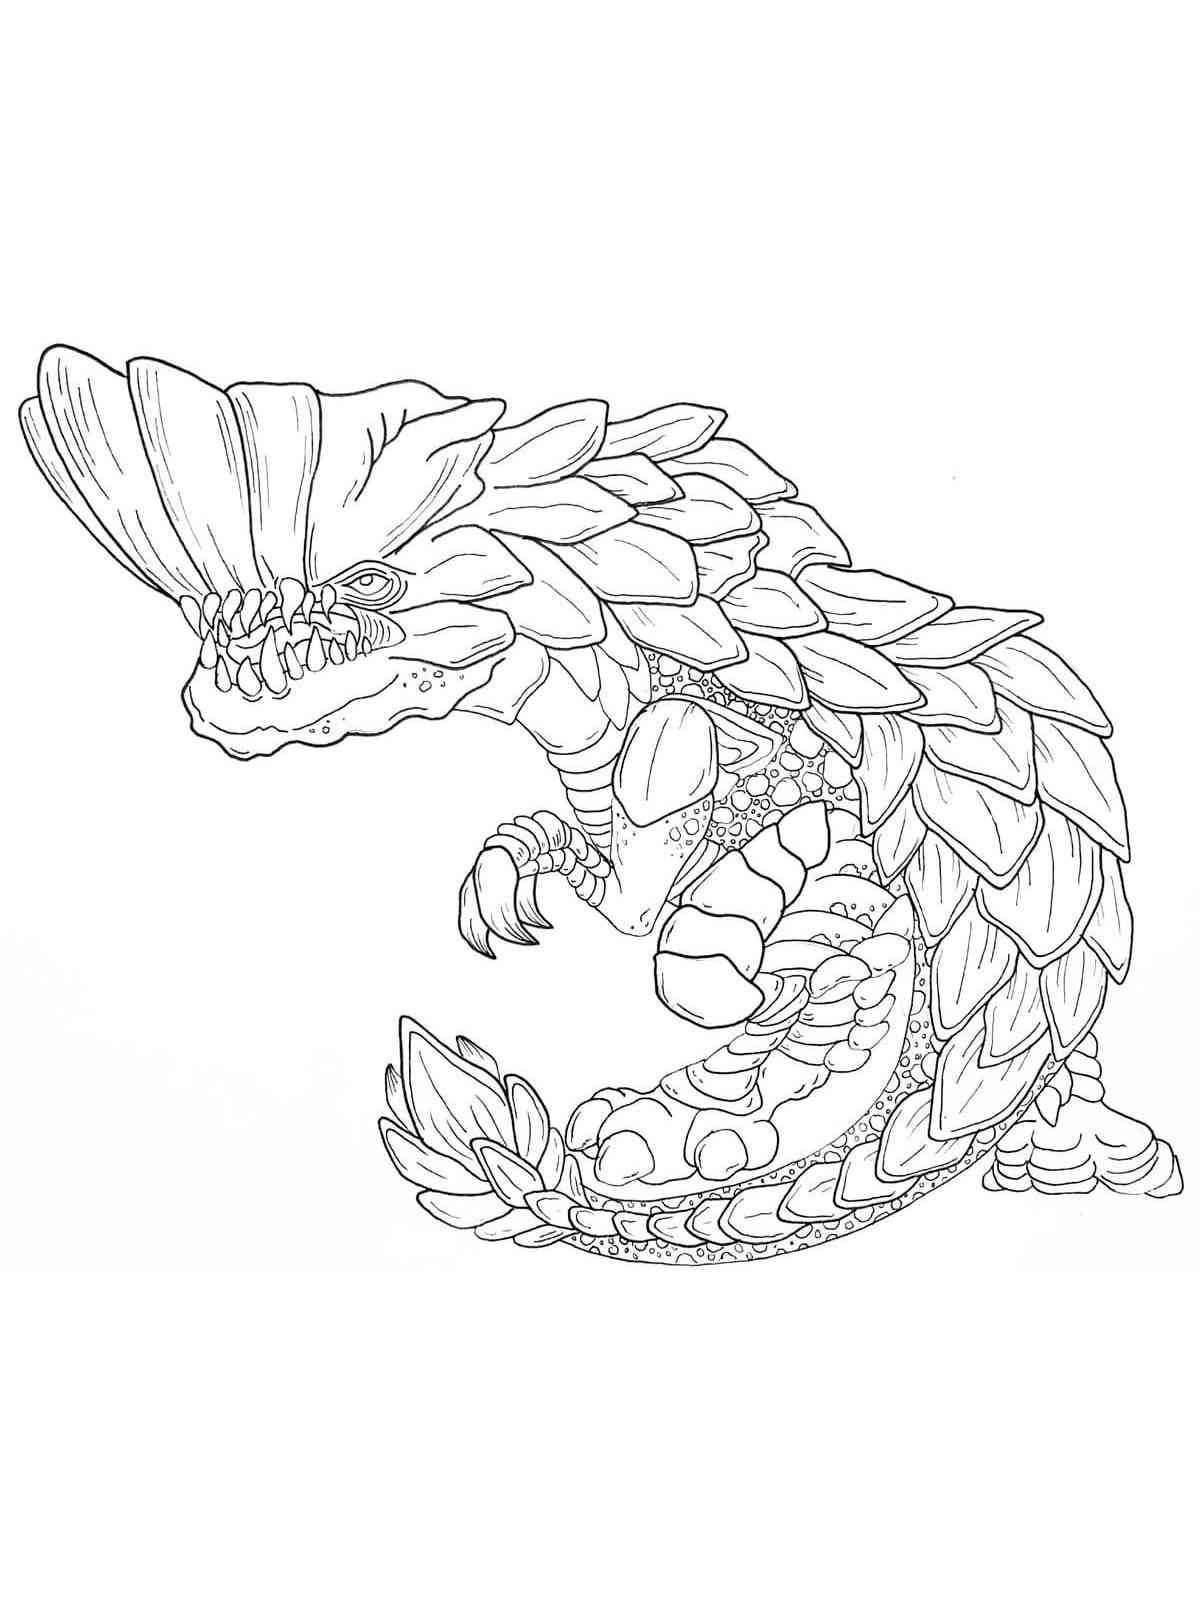 Barroth Monster Hunter coloring page